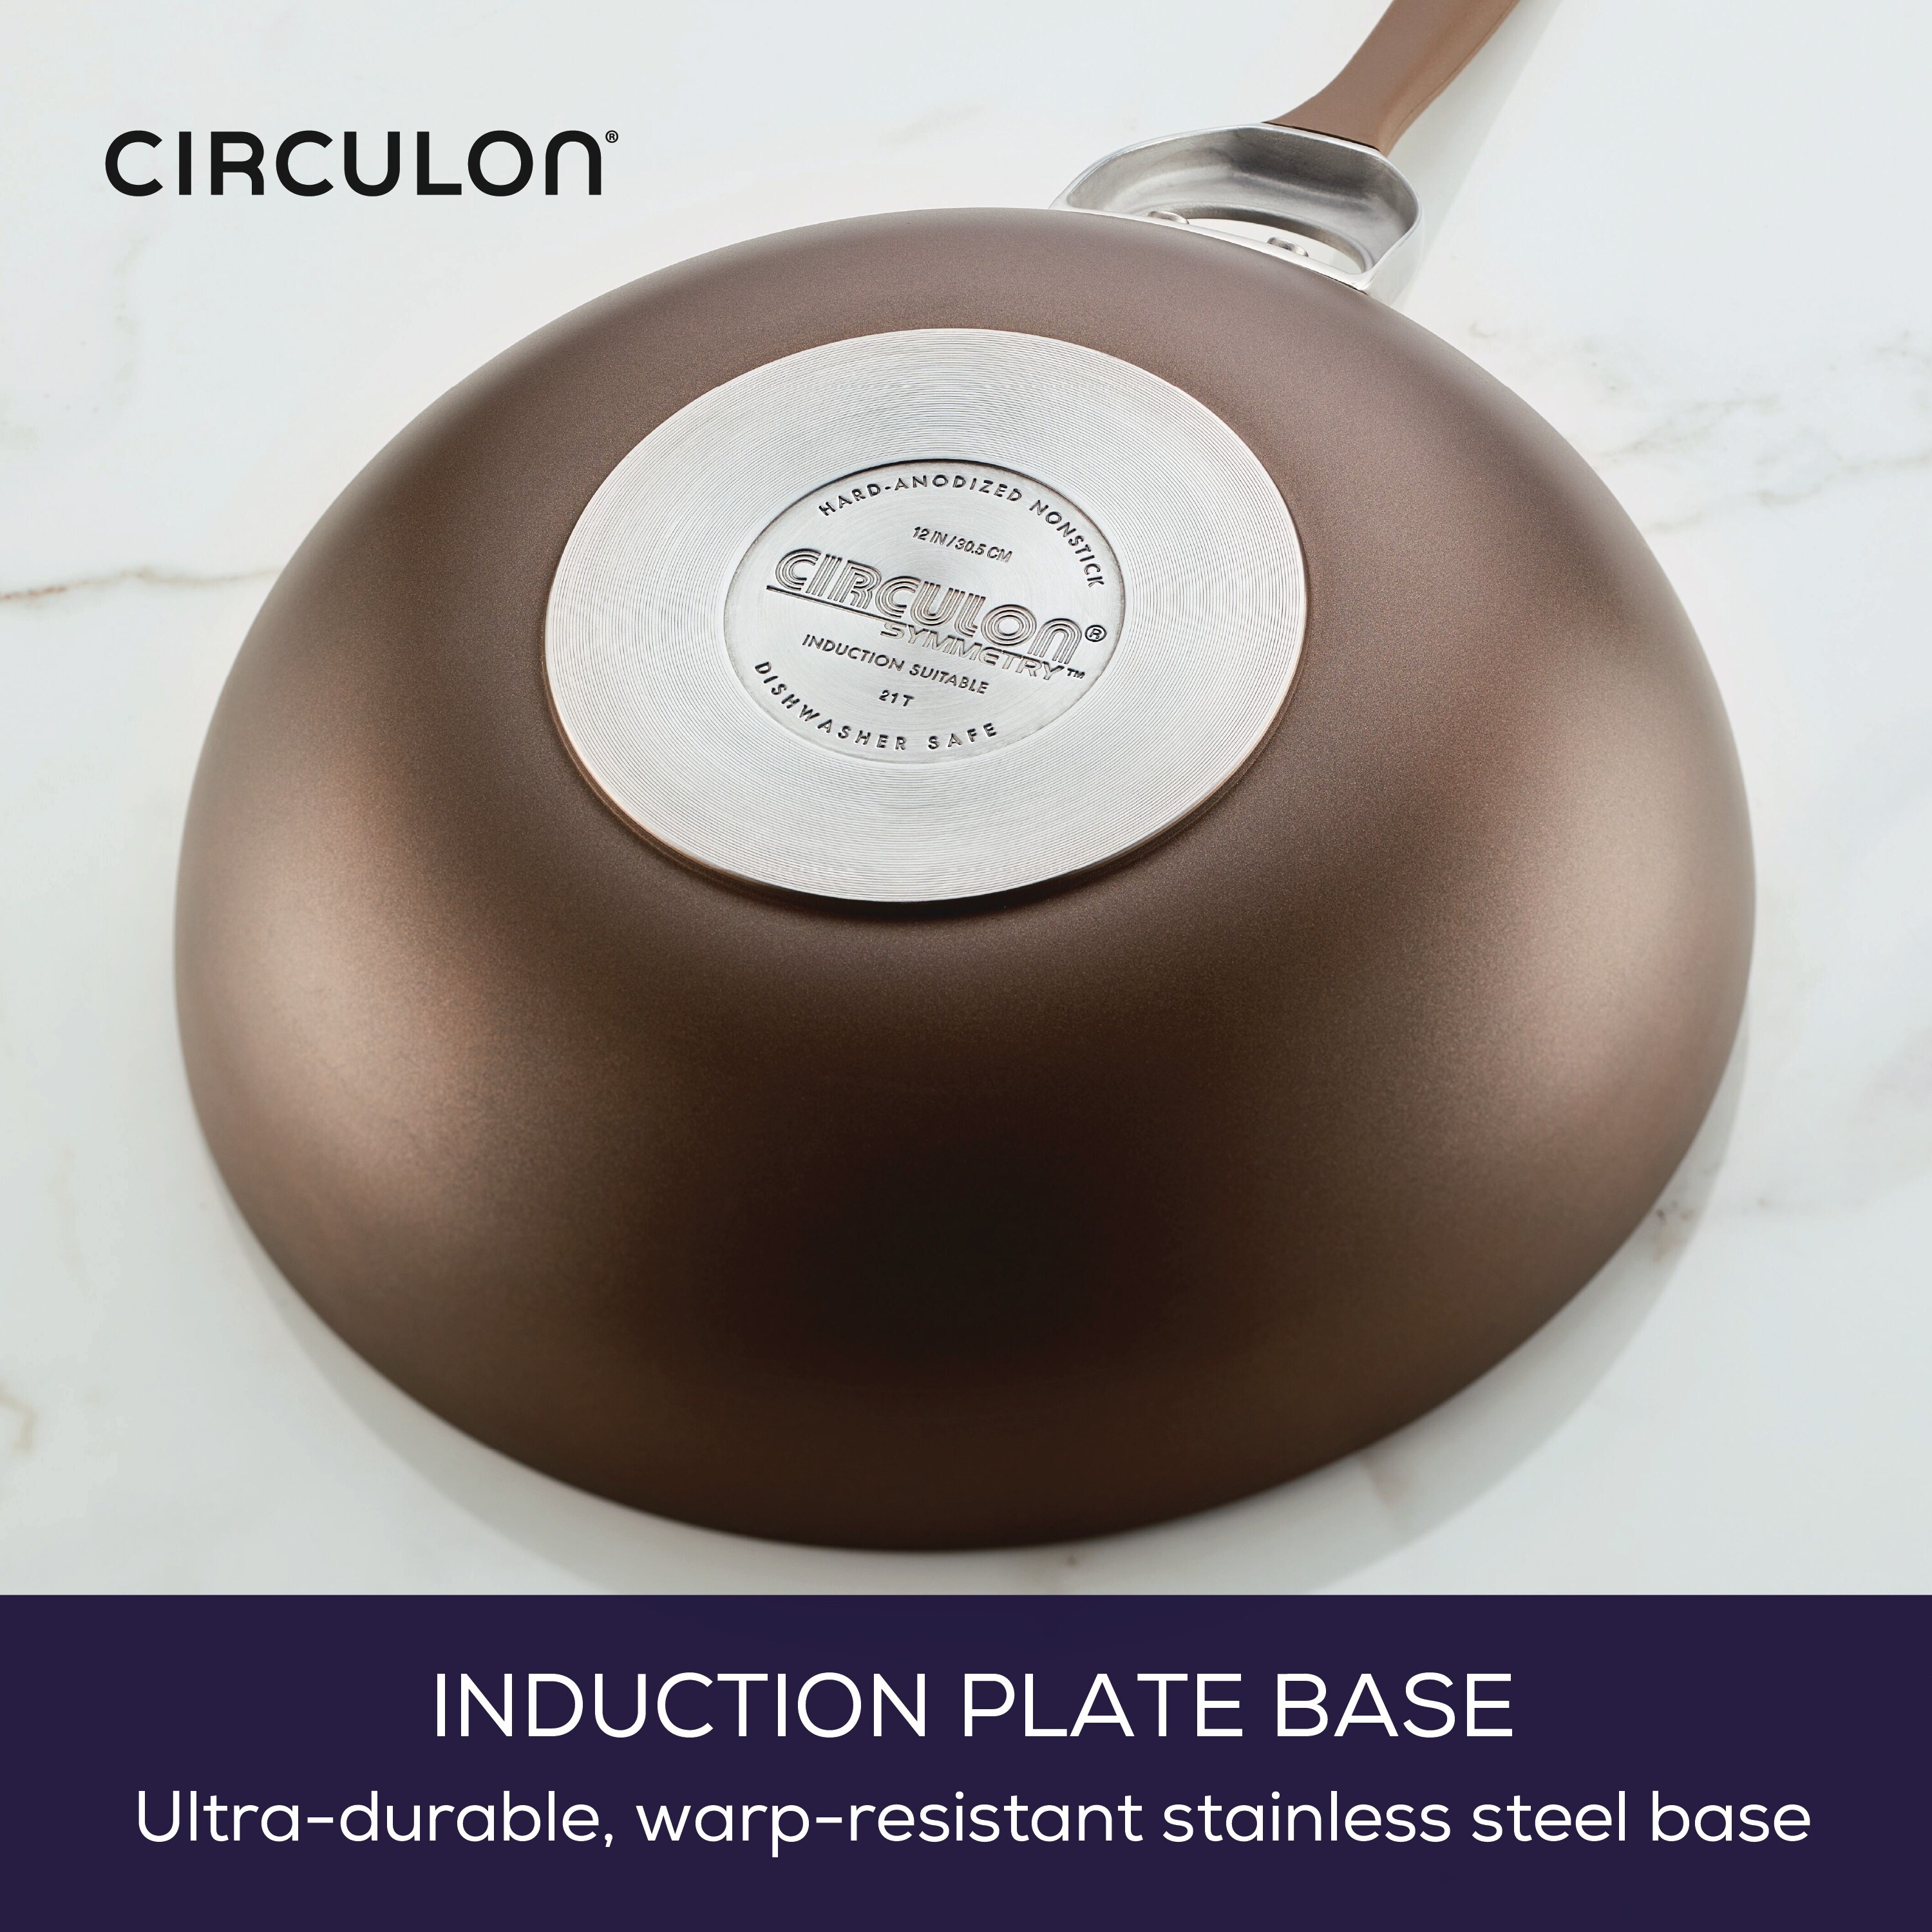 https://ak1.ostkcdn.com/images/products/is/images/direct/1ae8916d15743eefabc02985f6f357db6094998e/Circulon-Symmetry-Hard-Anodized-Nonstick-Induction-Chef-Pan-with-Lid%2C-12-Inch%2C-Chocolate.jpg